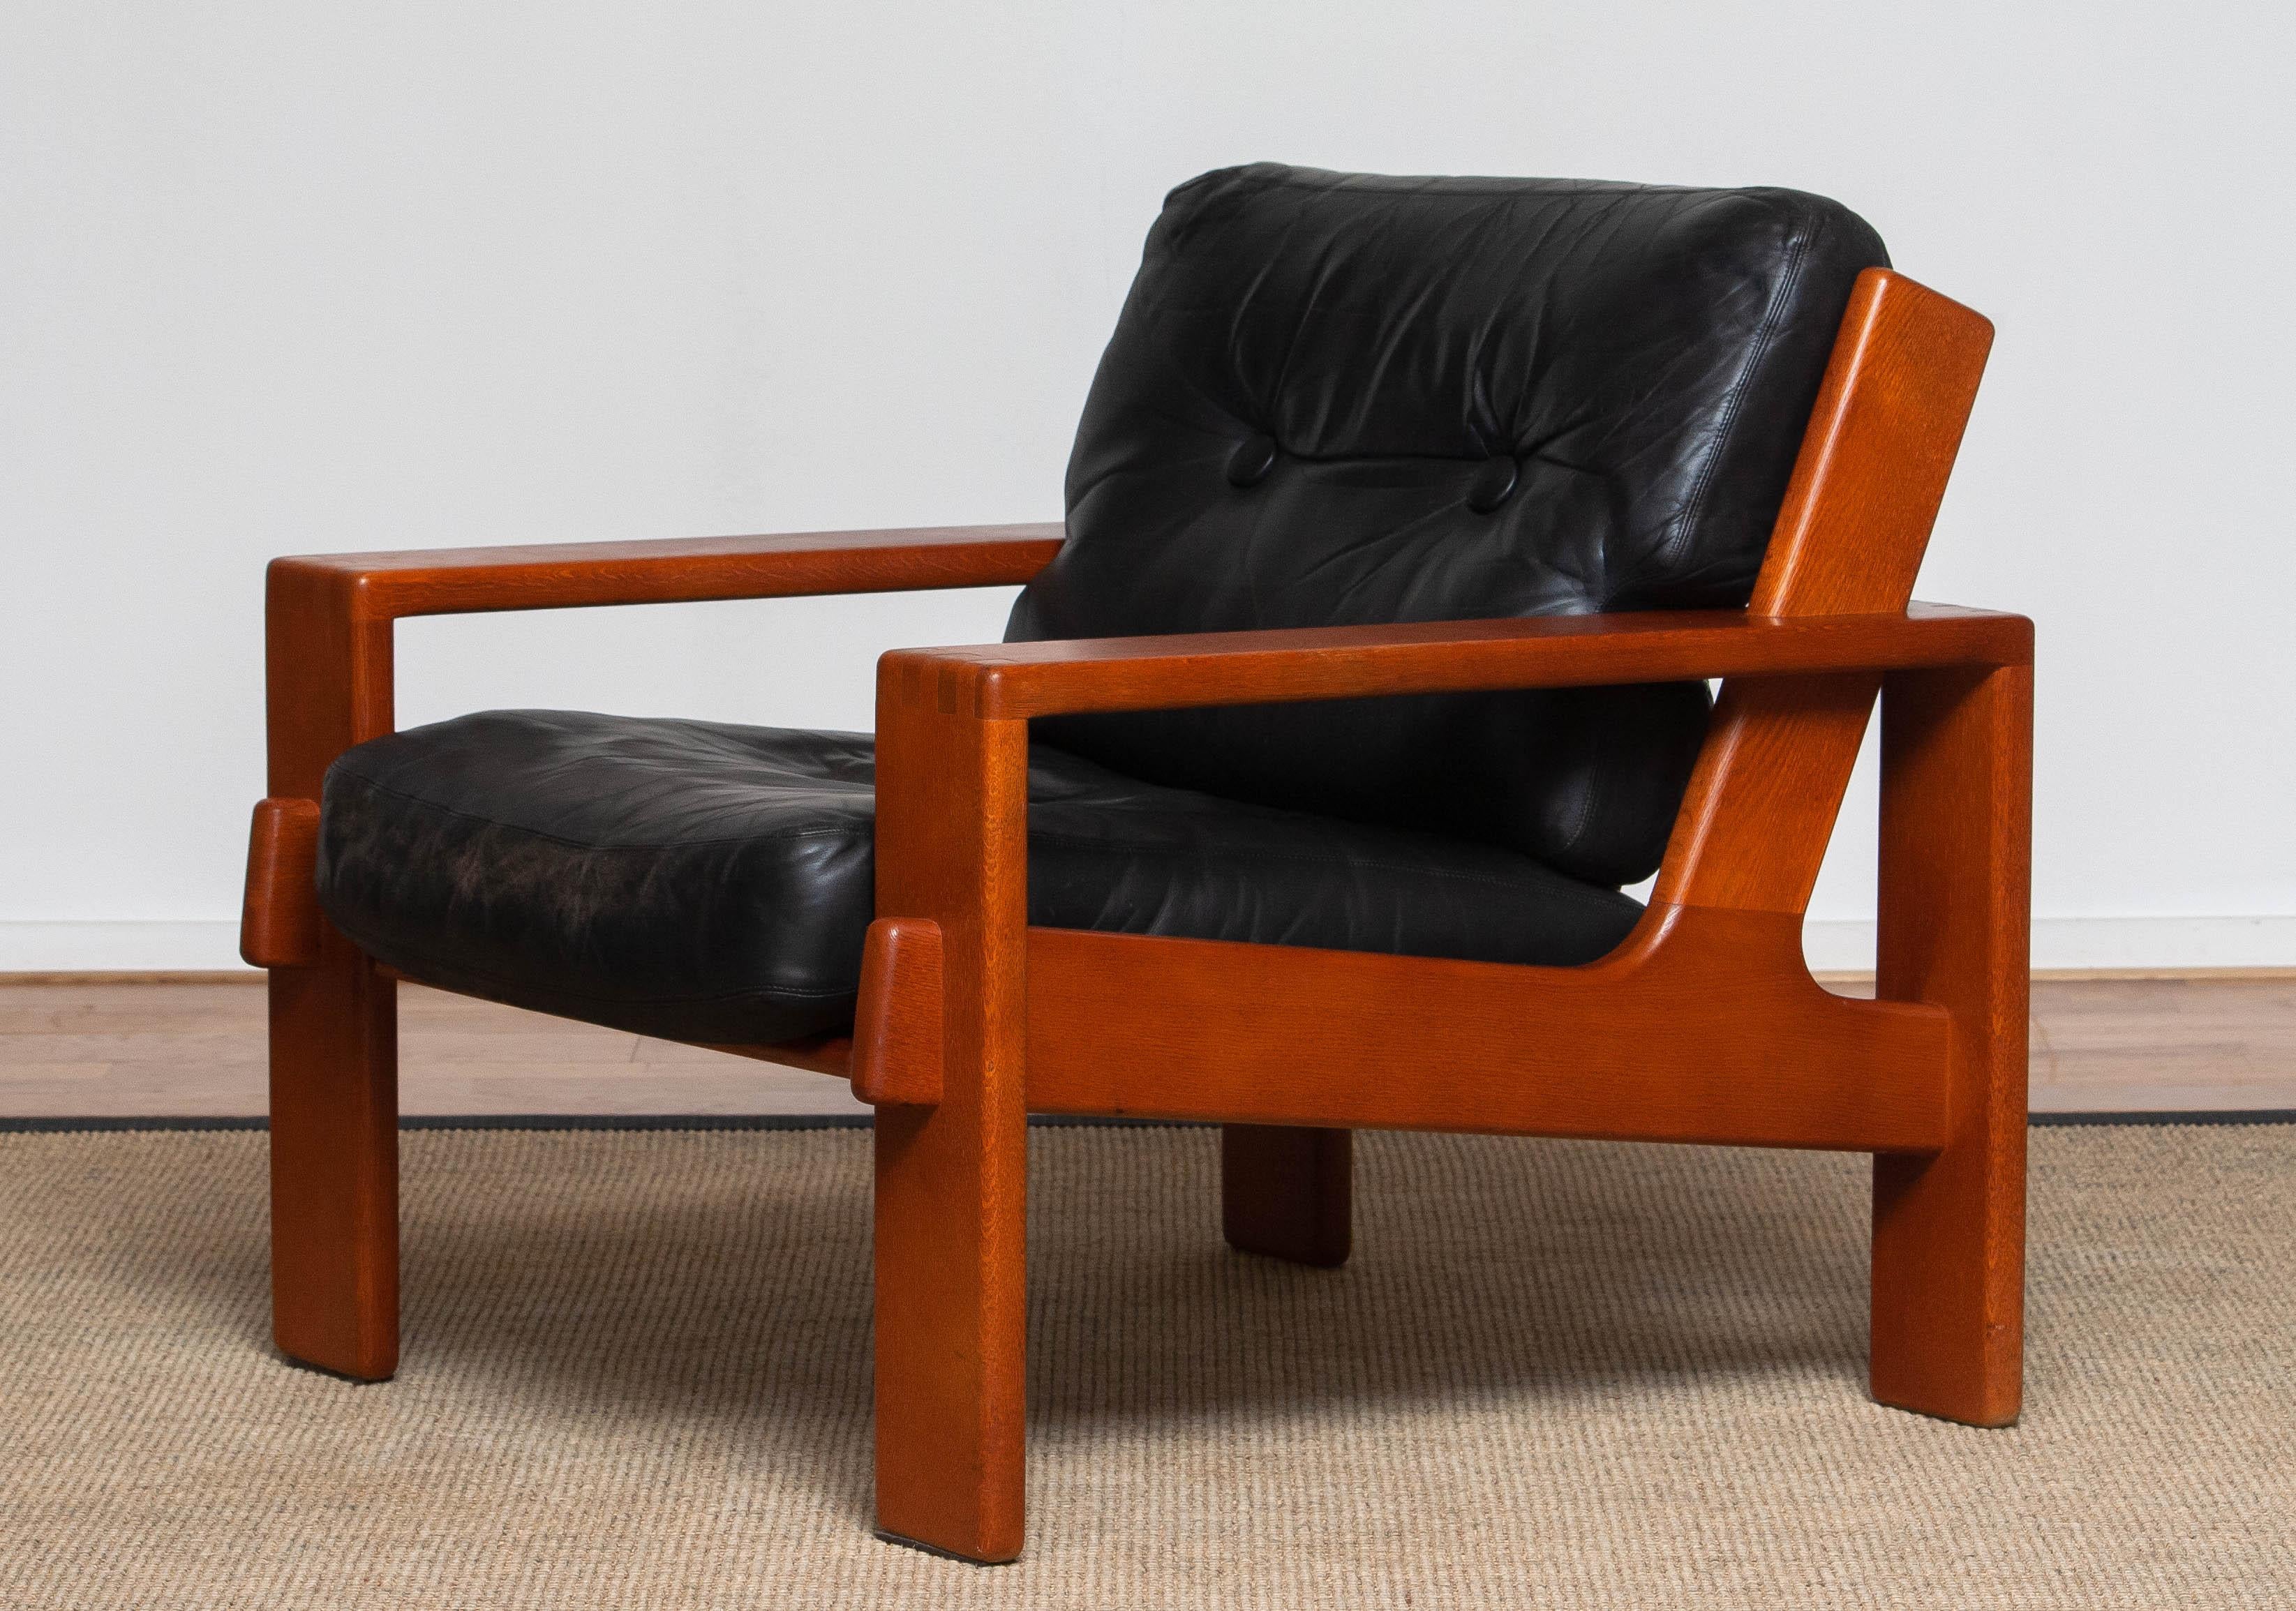 Mid-20th Century 1960s, Teak and Black Leather Cubist Lounge Chair by Esko Pajamies for Asko